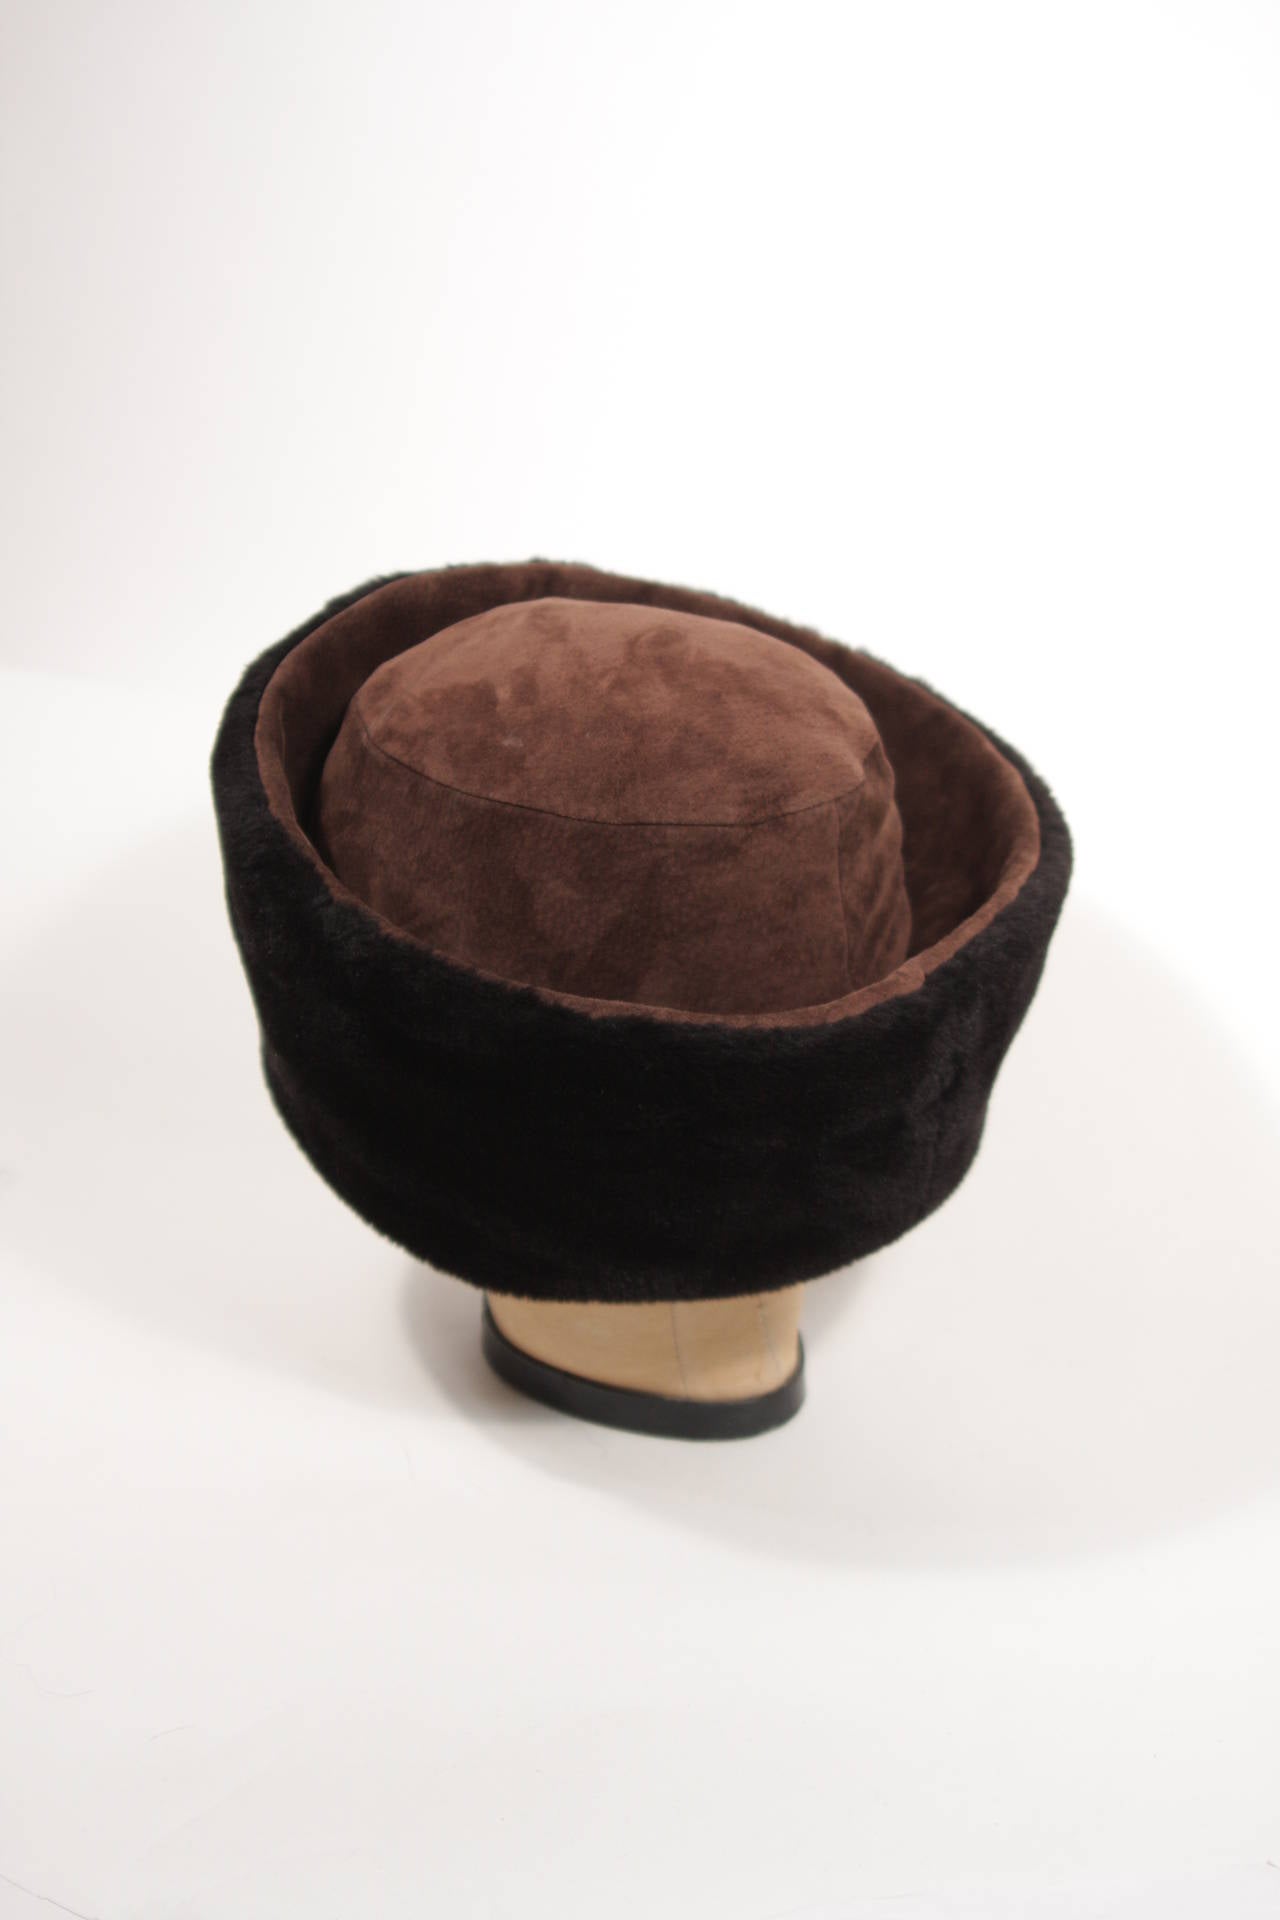 Yves Saint Laurent Brown Suede Hat with Black Sherling Interior 2